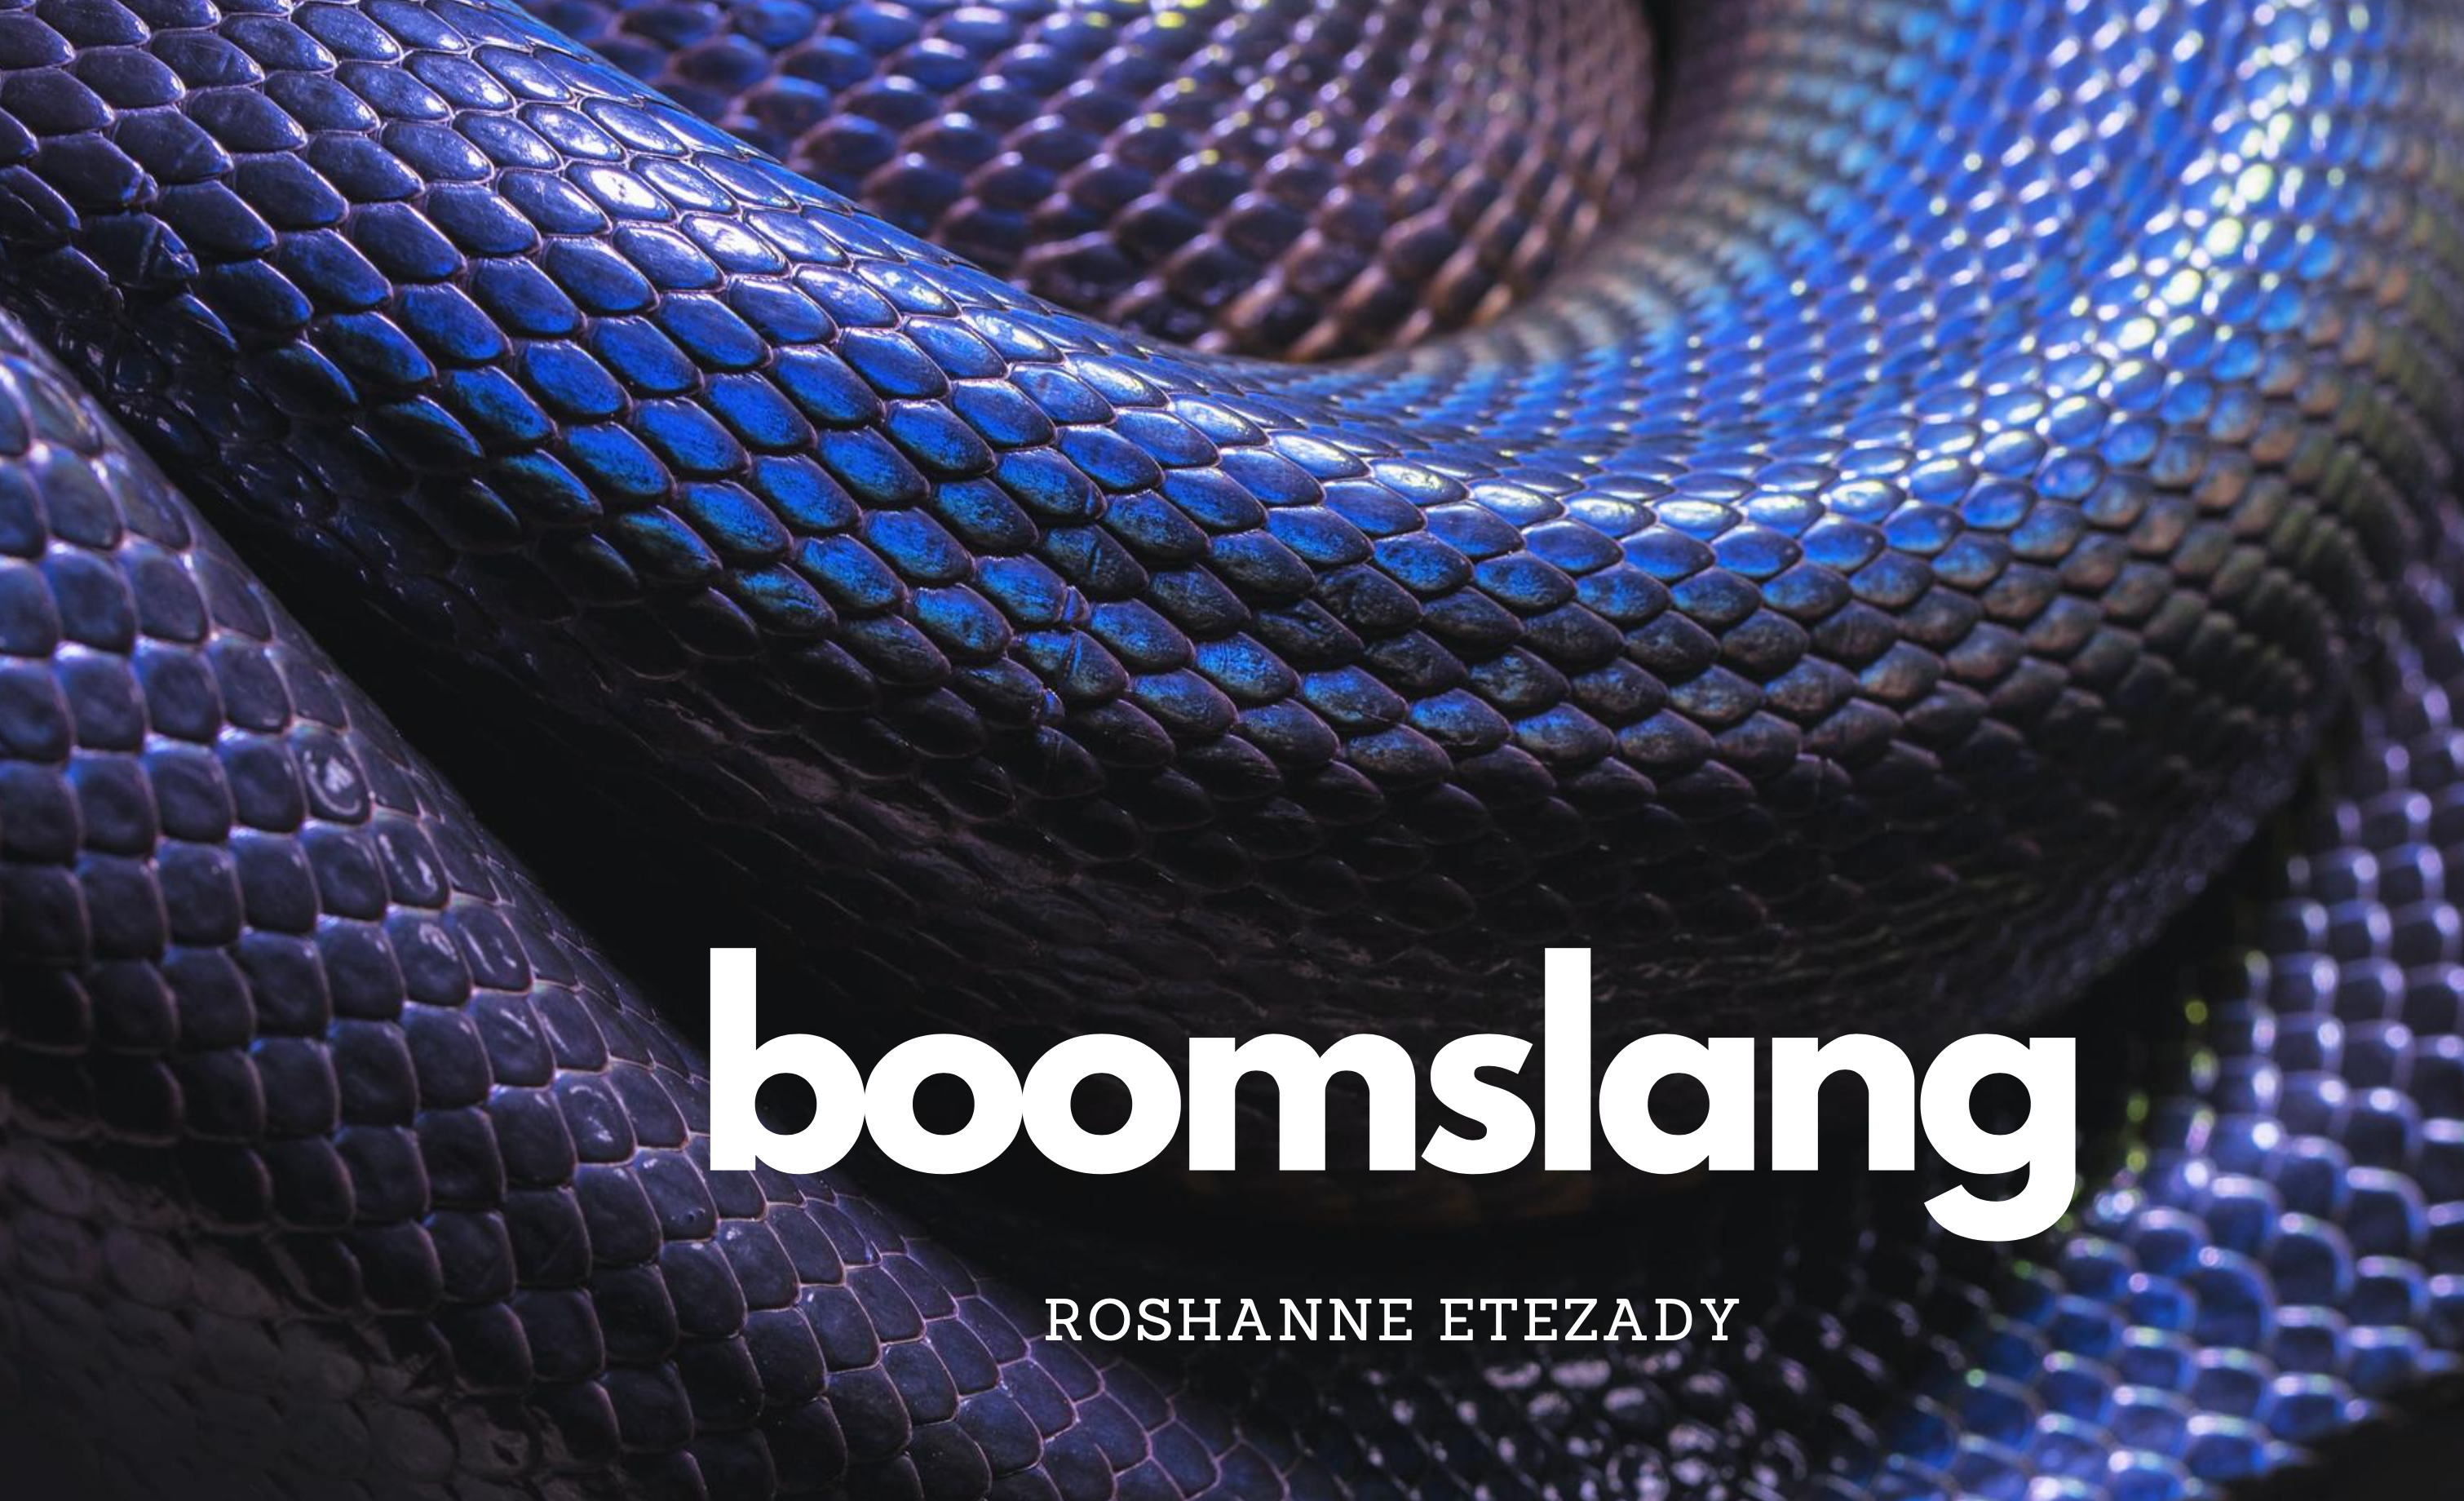 Boomslang by Roshanne Etezady